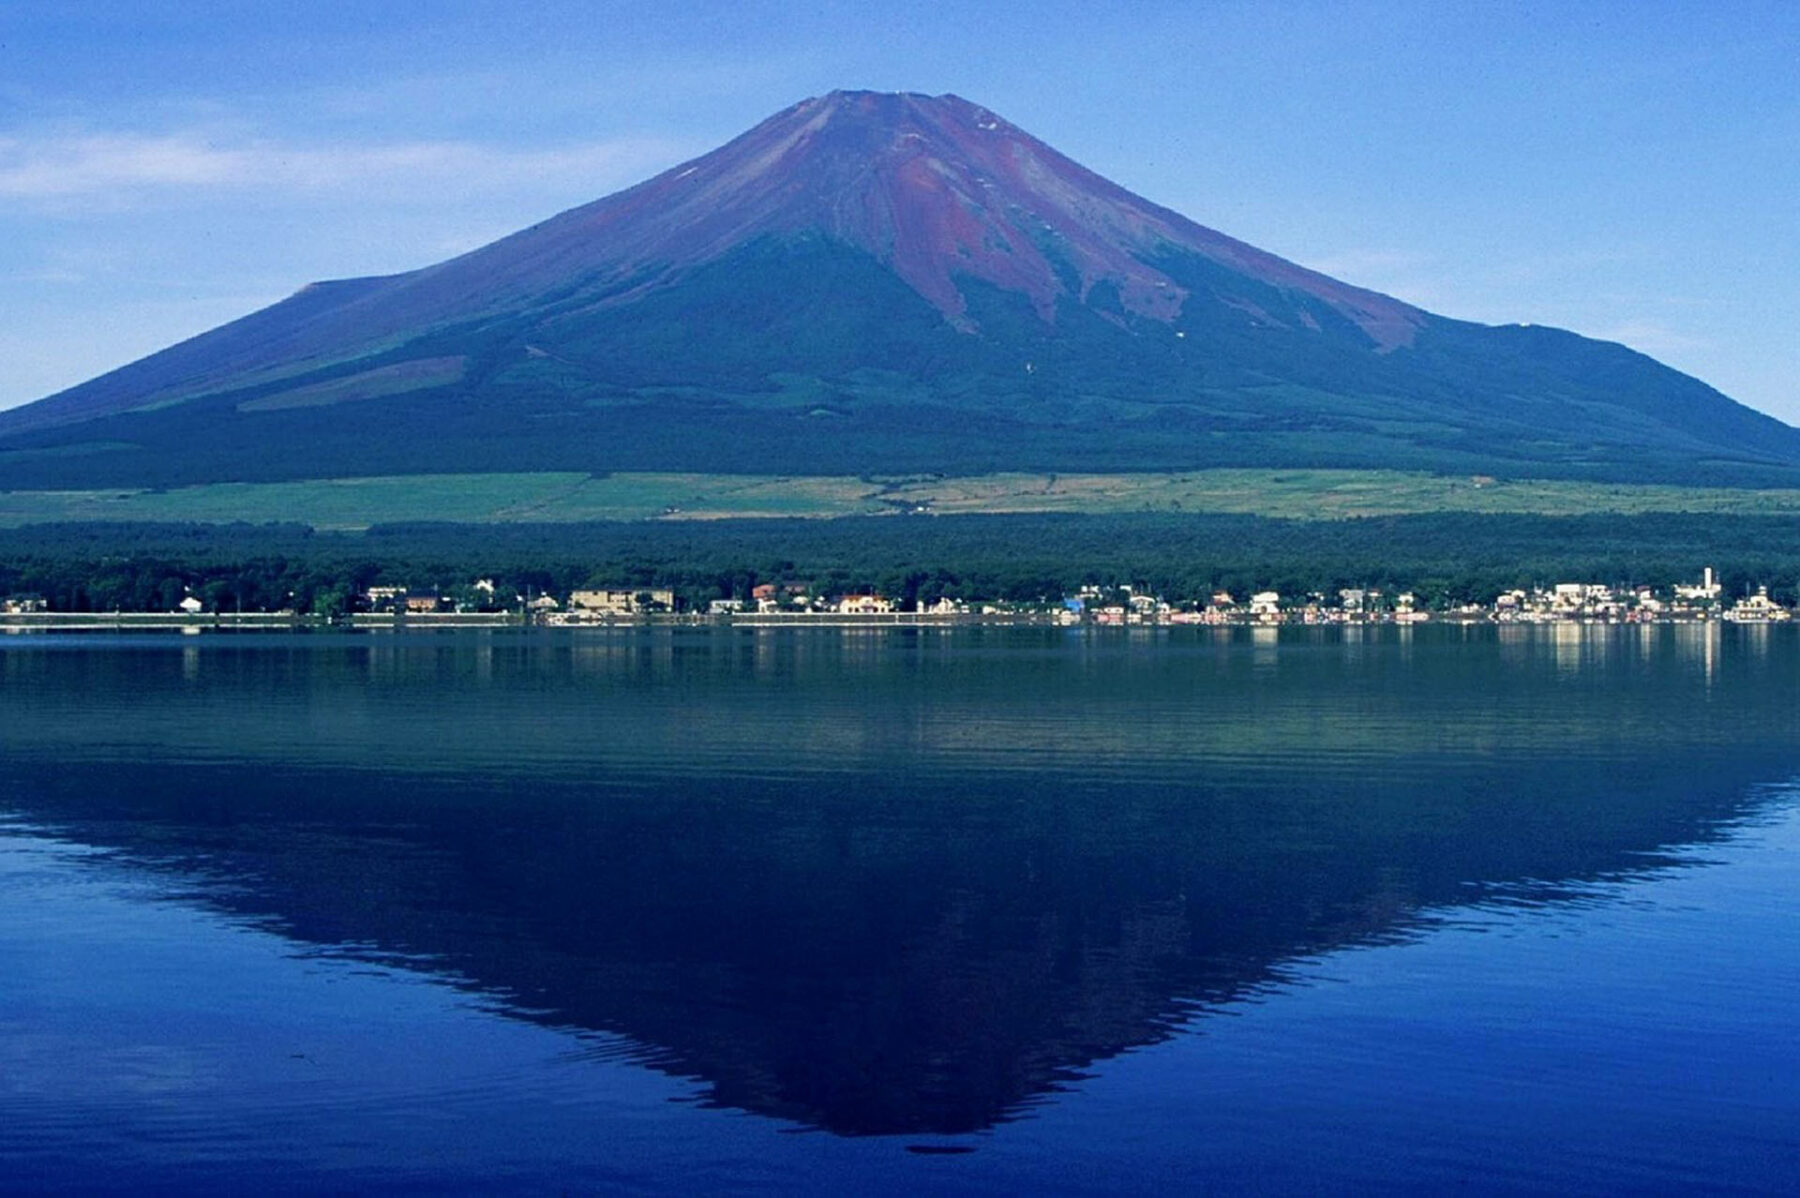 The Iconic Mount Fuji - Japan - The Travel Agent, Inc.